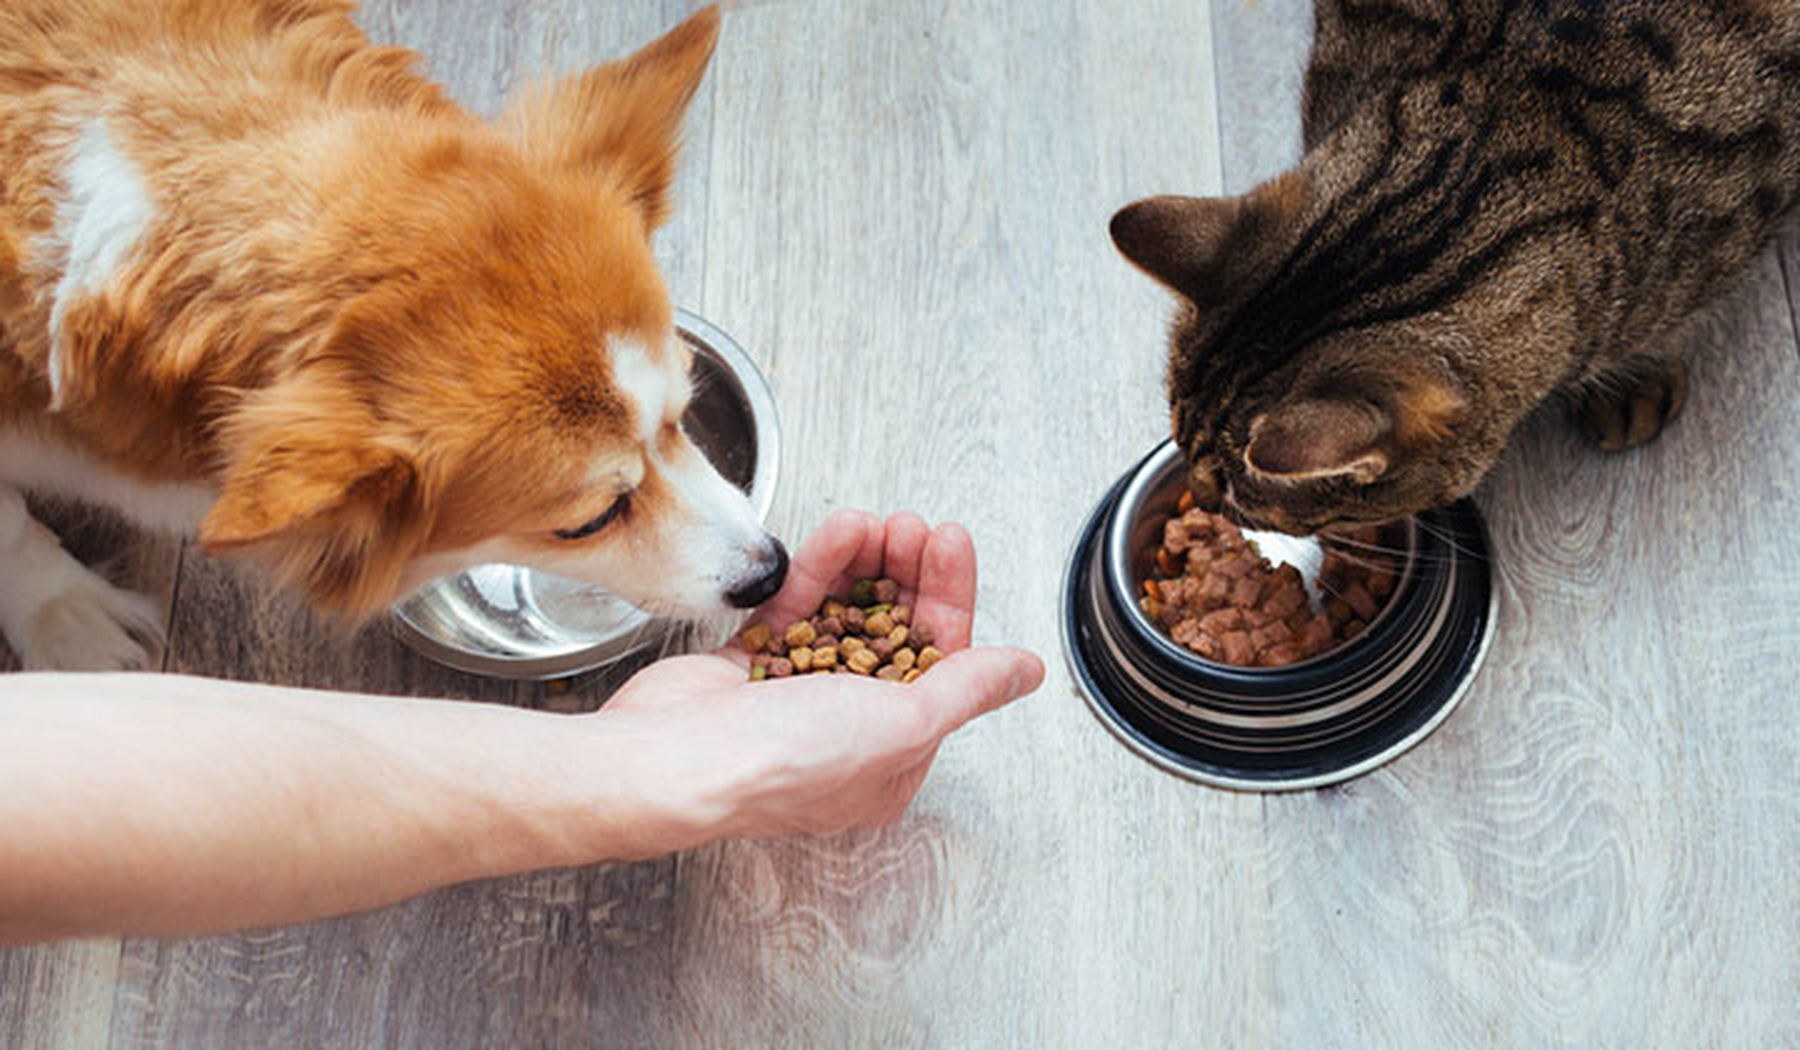 Dog and cat eating food out of bowls on the floor